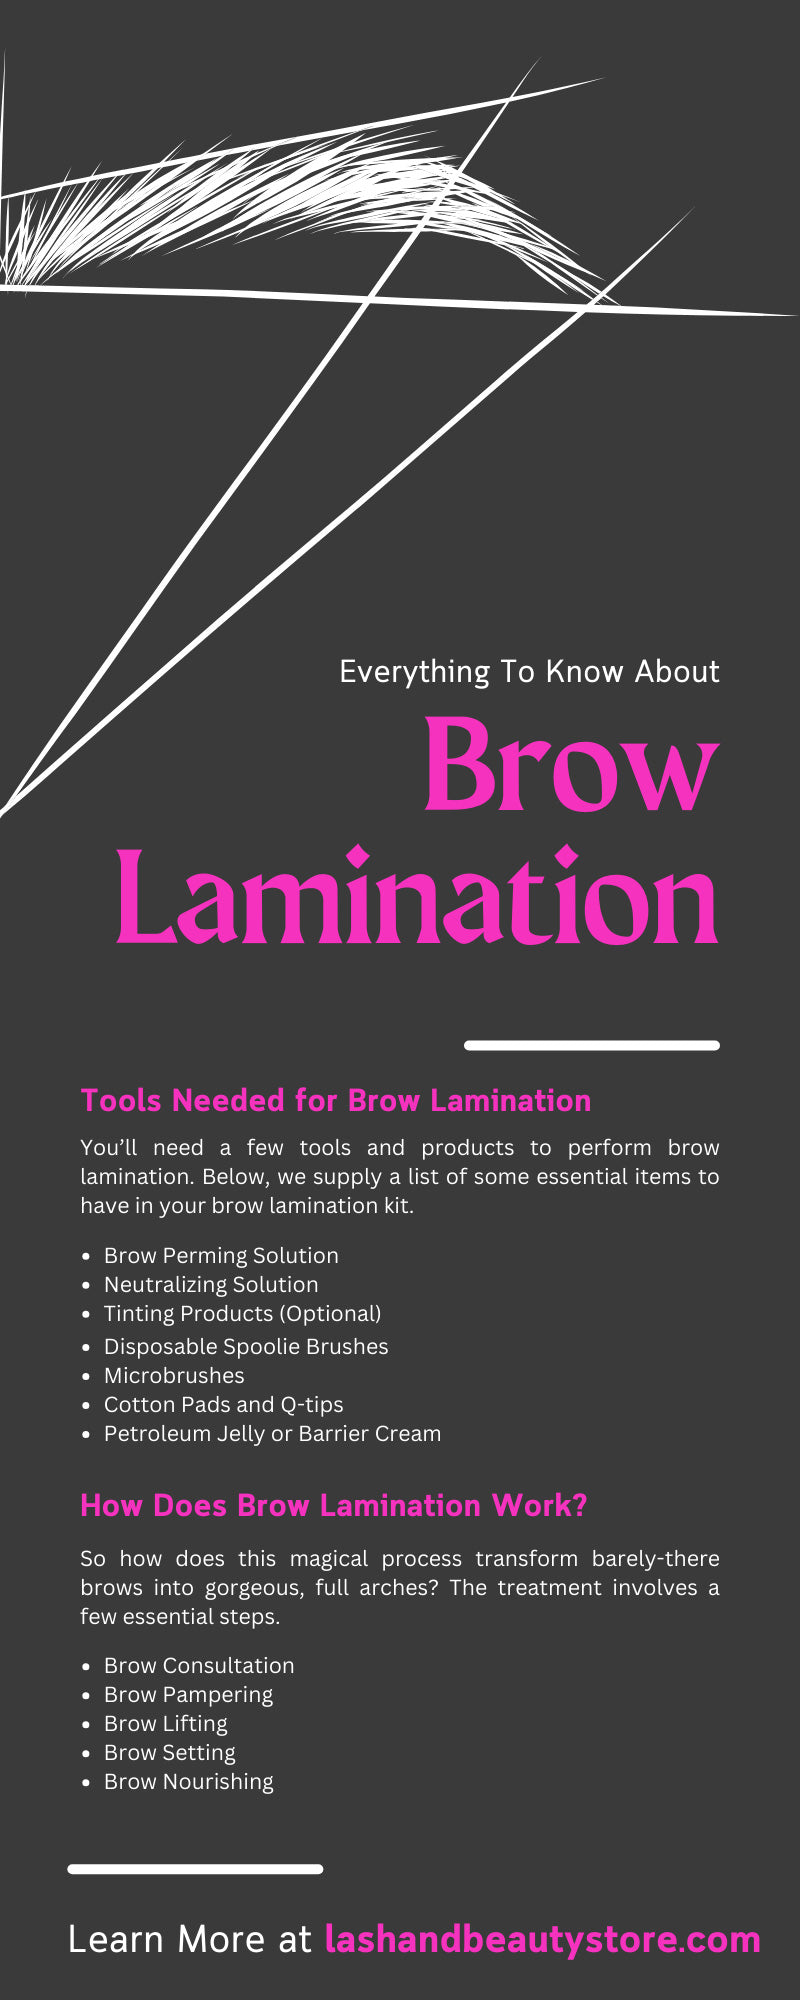 Everything To Know About Brow Lamination